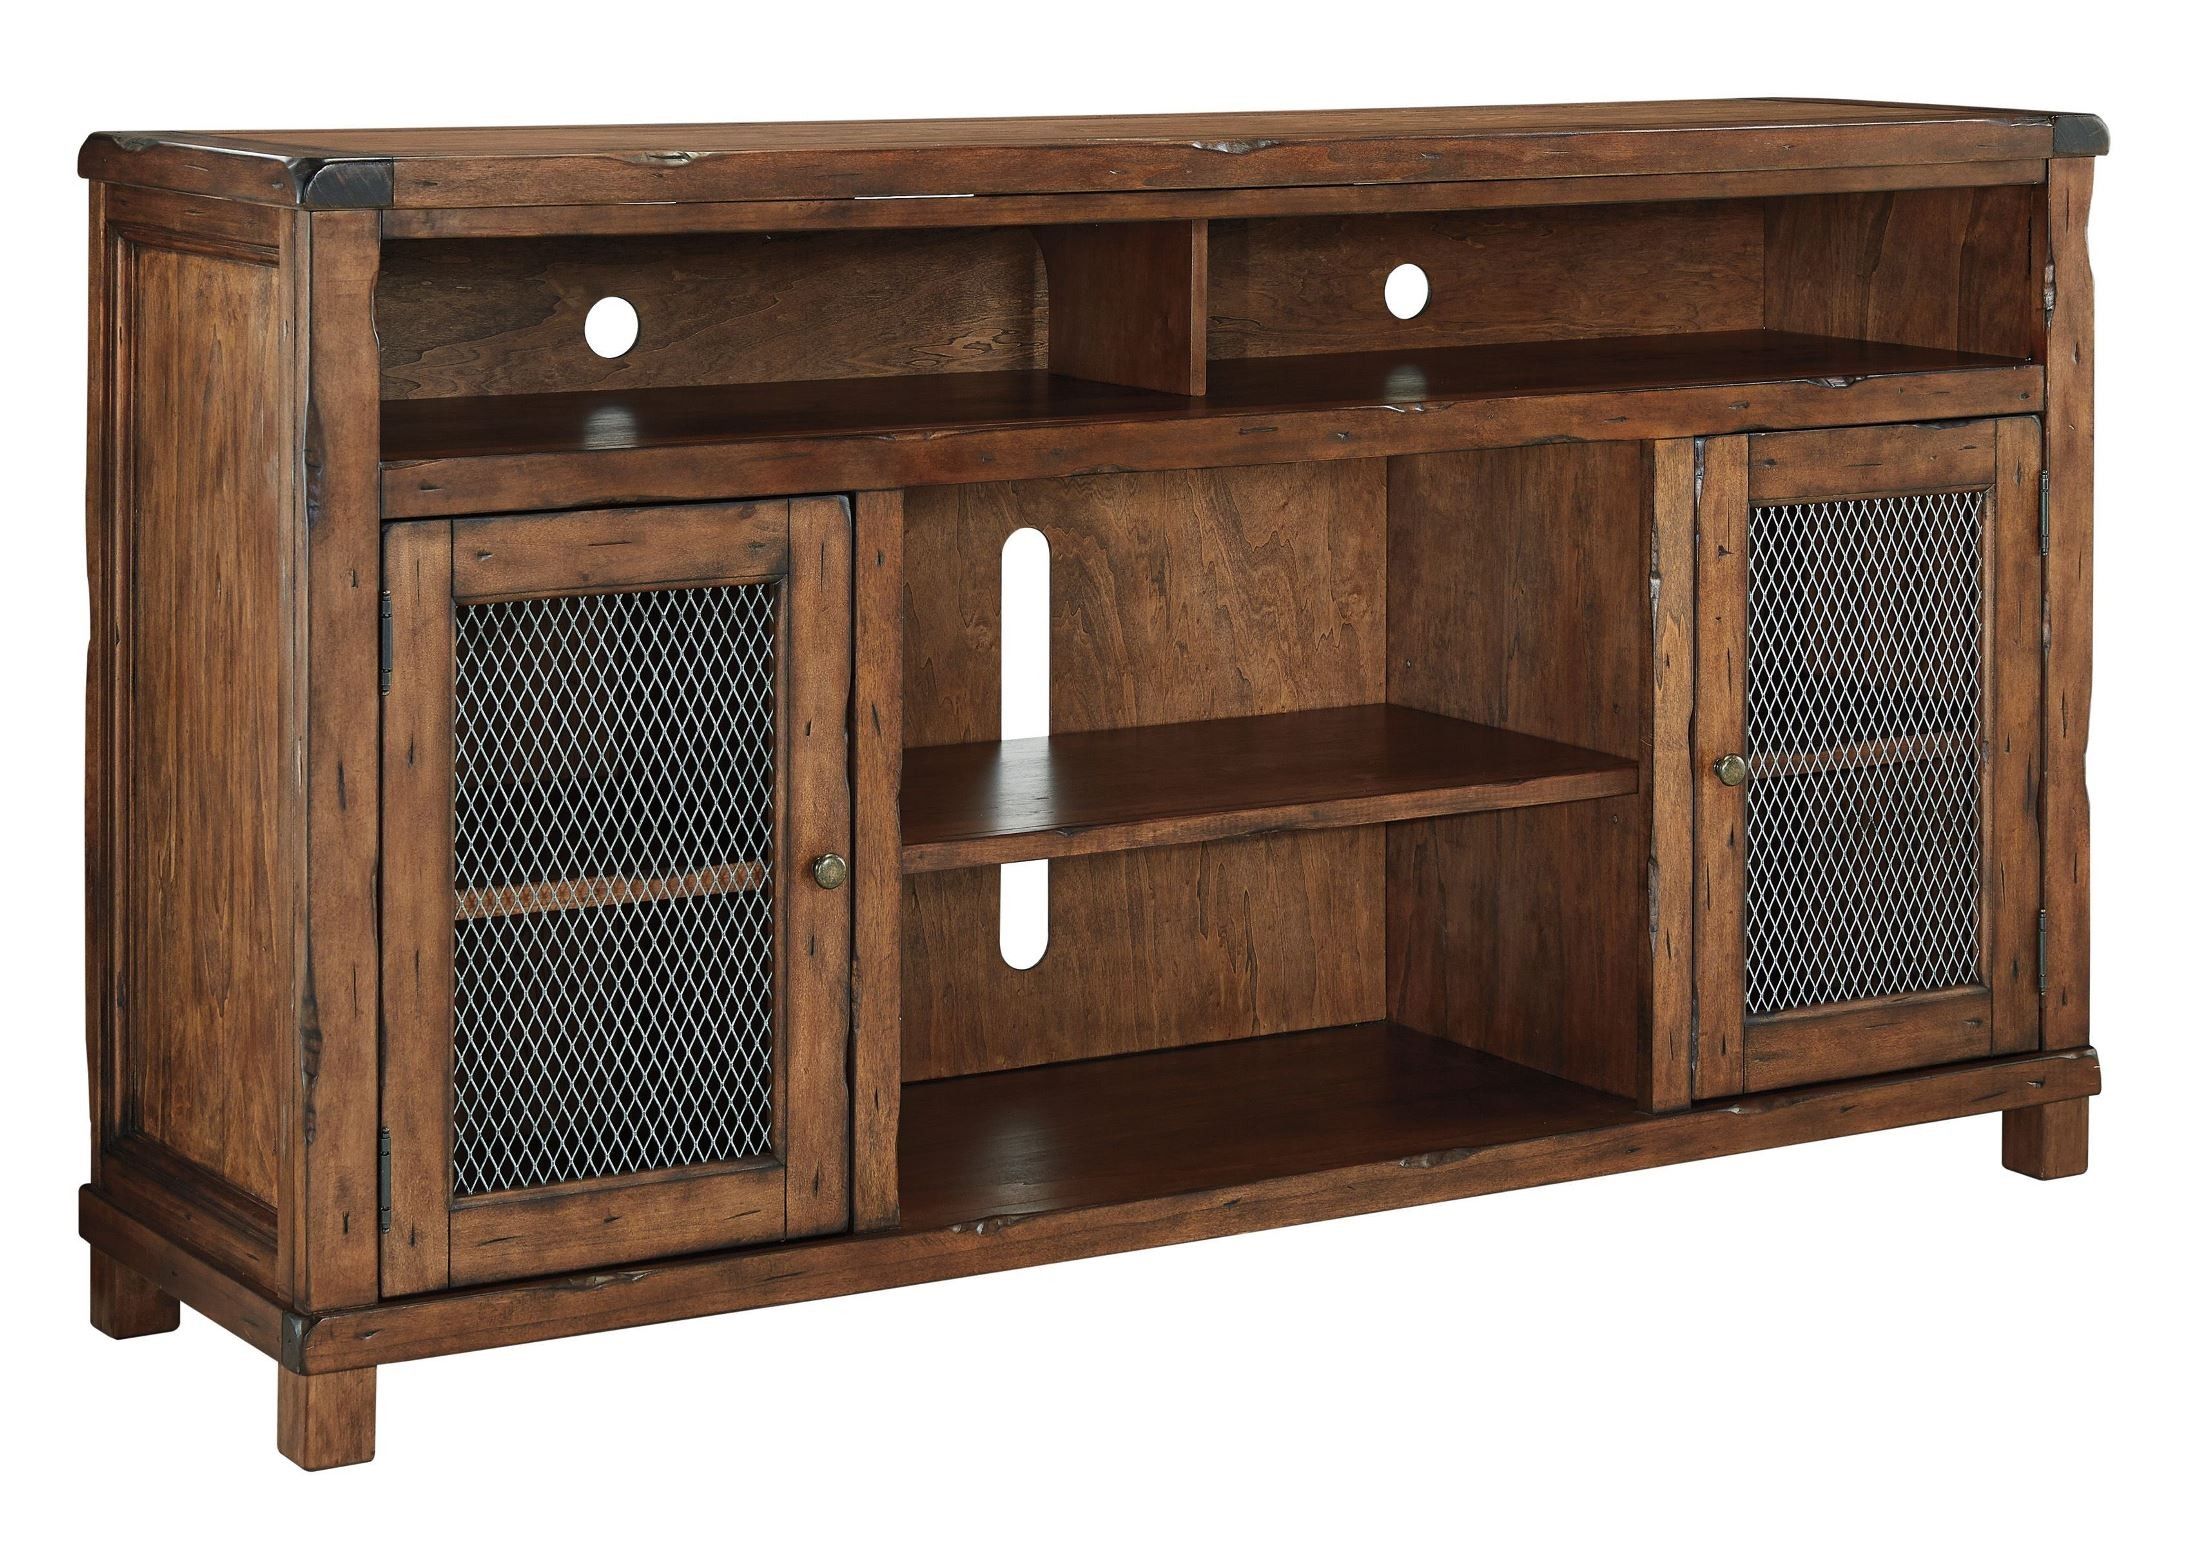 Tamonie Rustic Brown Extra Large Tv Stand With Fireplace For Rustic Tv Stands For Sale (View 4 of 15)